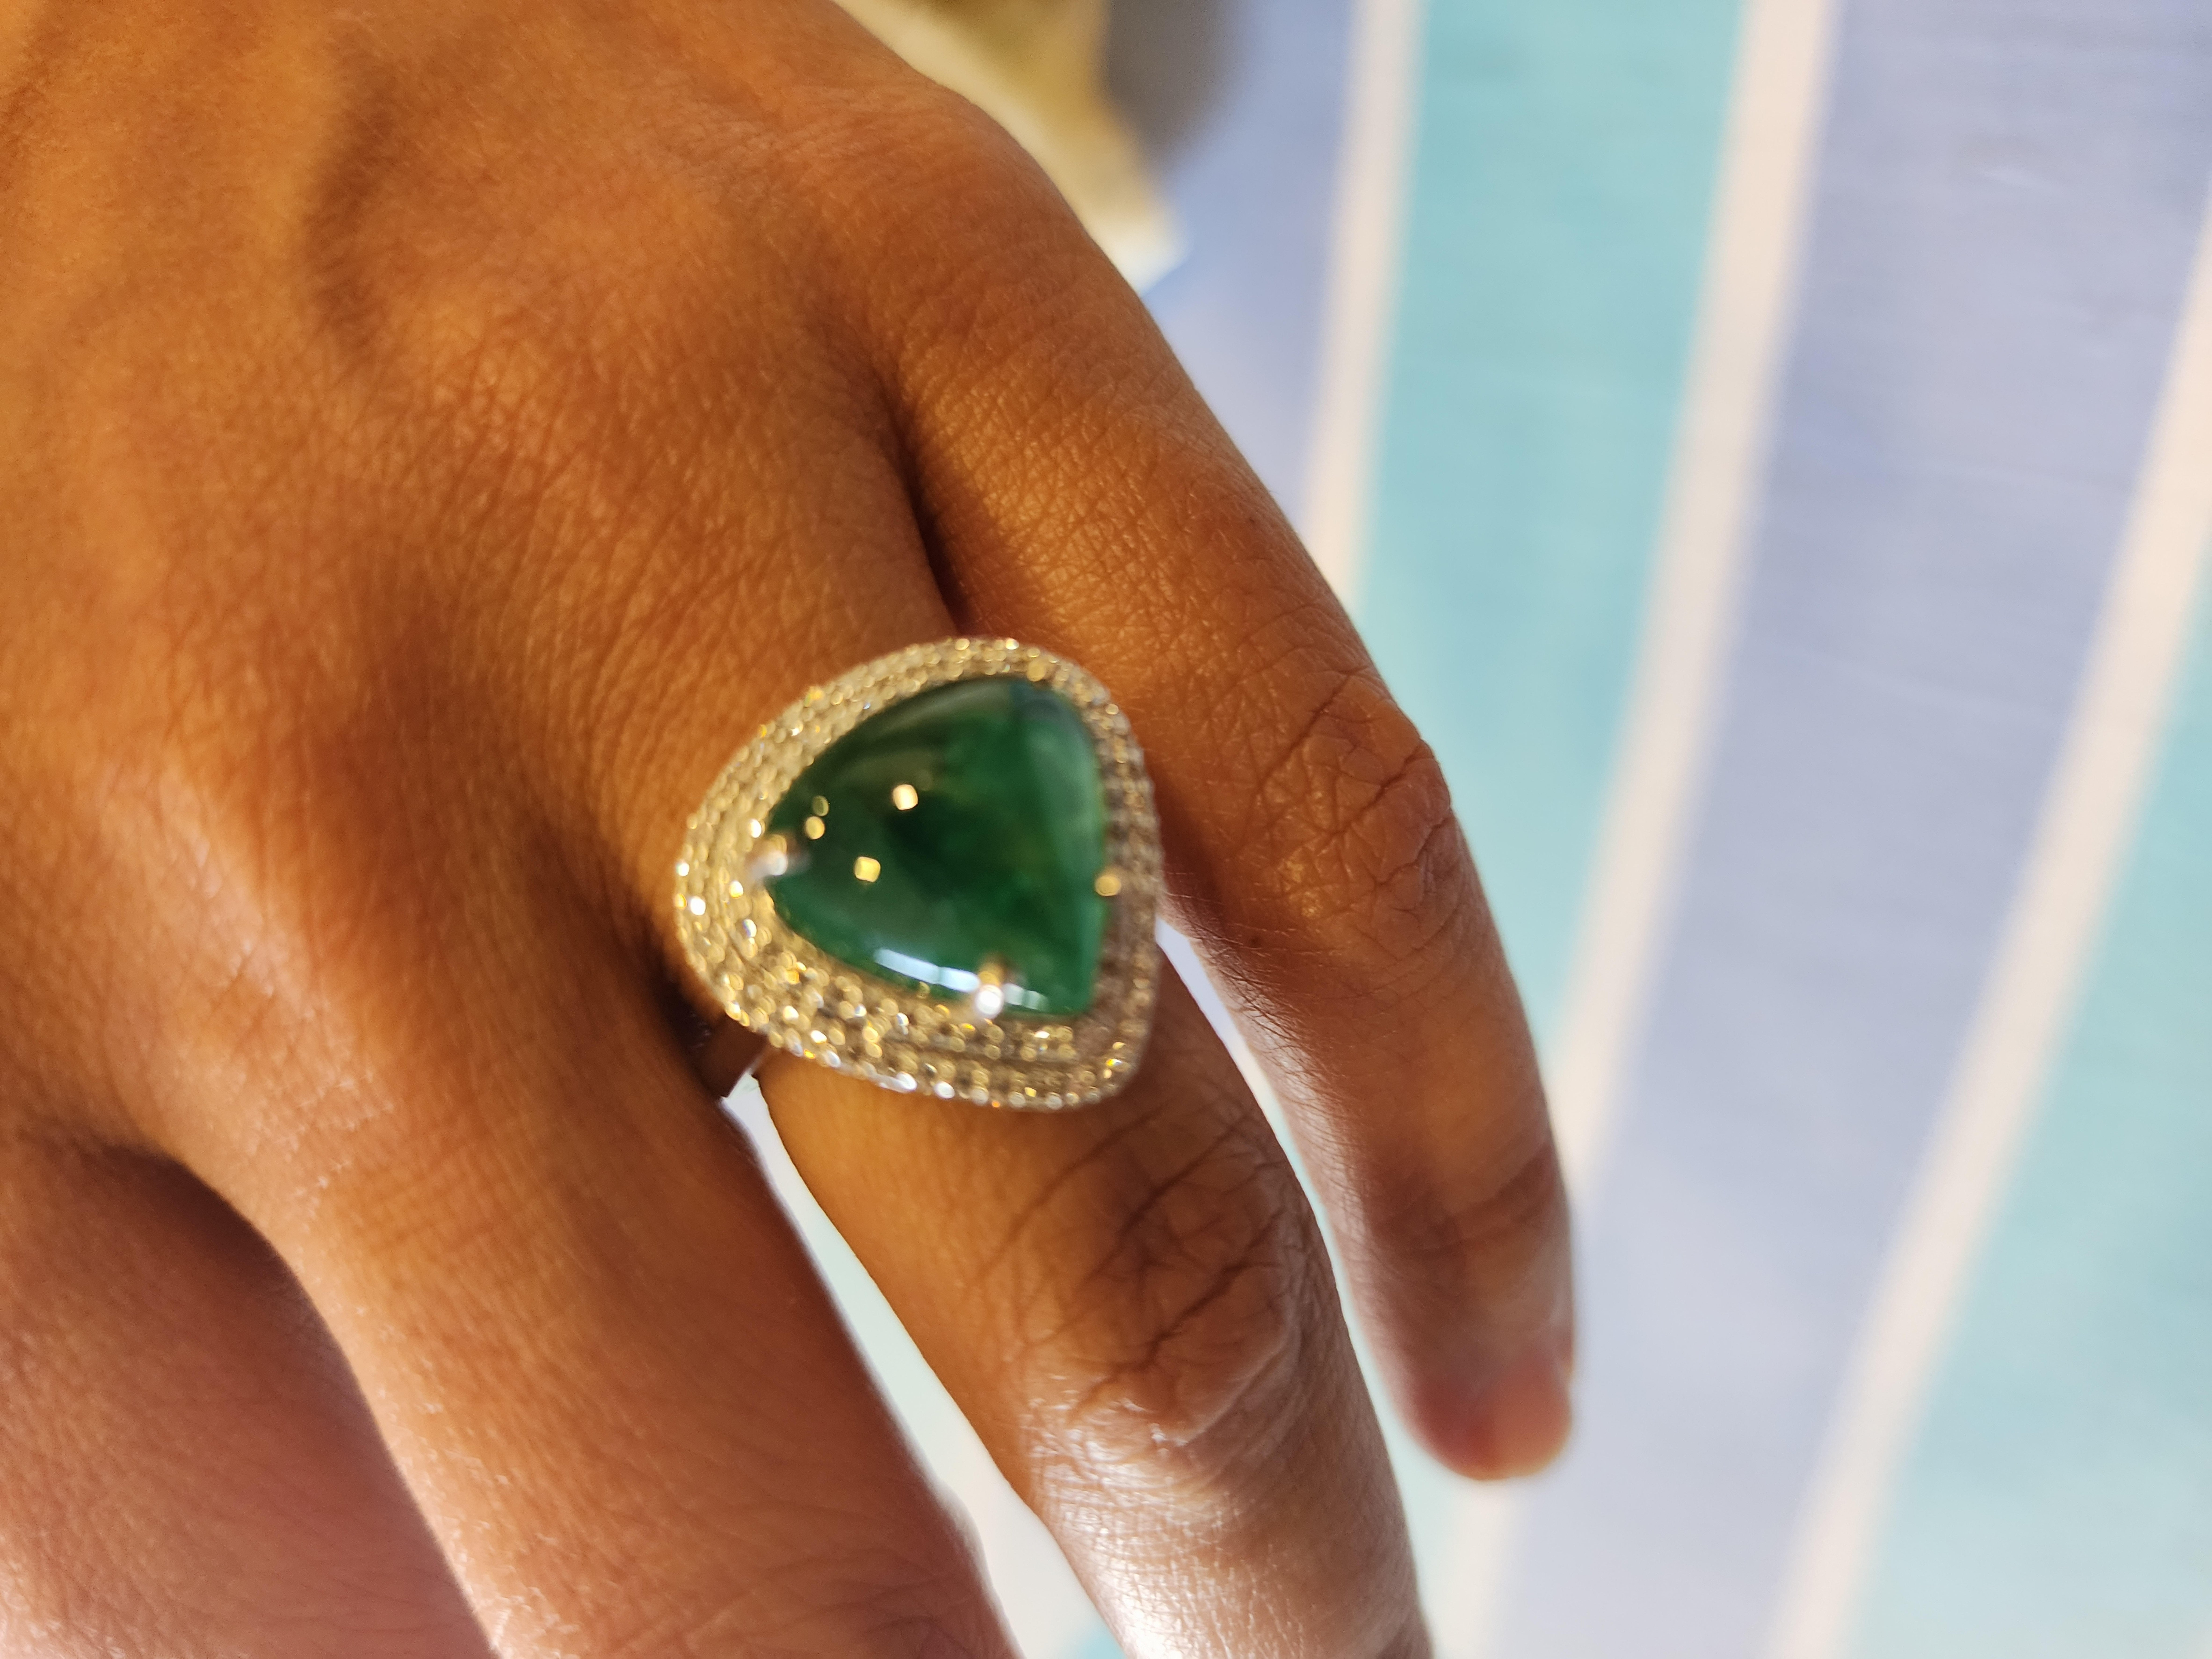 This is a natural Zambian Emerald ring with diamonds and 18k gold. The emeralds are very high quality and very good quality diamonds the clarity is vsi and G colour


Emeralds : 8.21 carats
diamonds : 0.60 carats
gold : 4.948 gms

This is a Brand